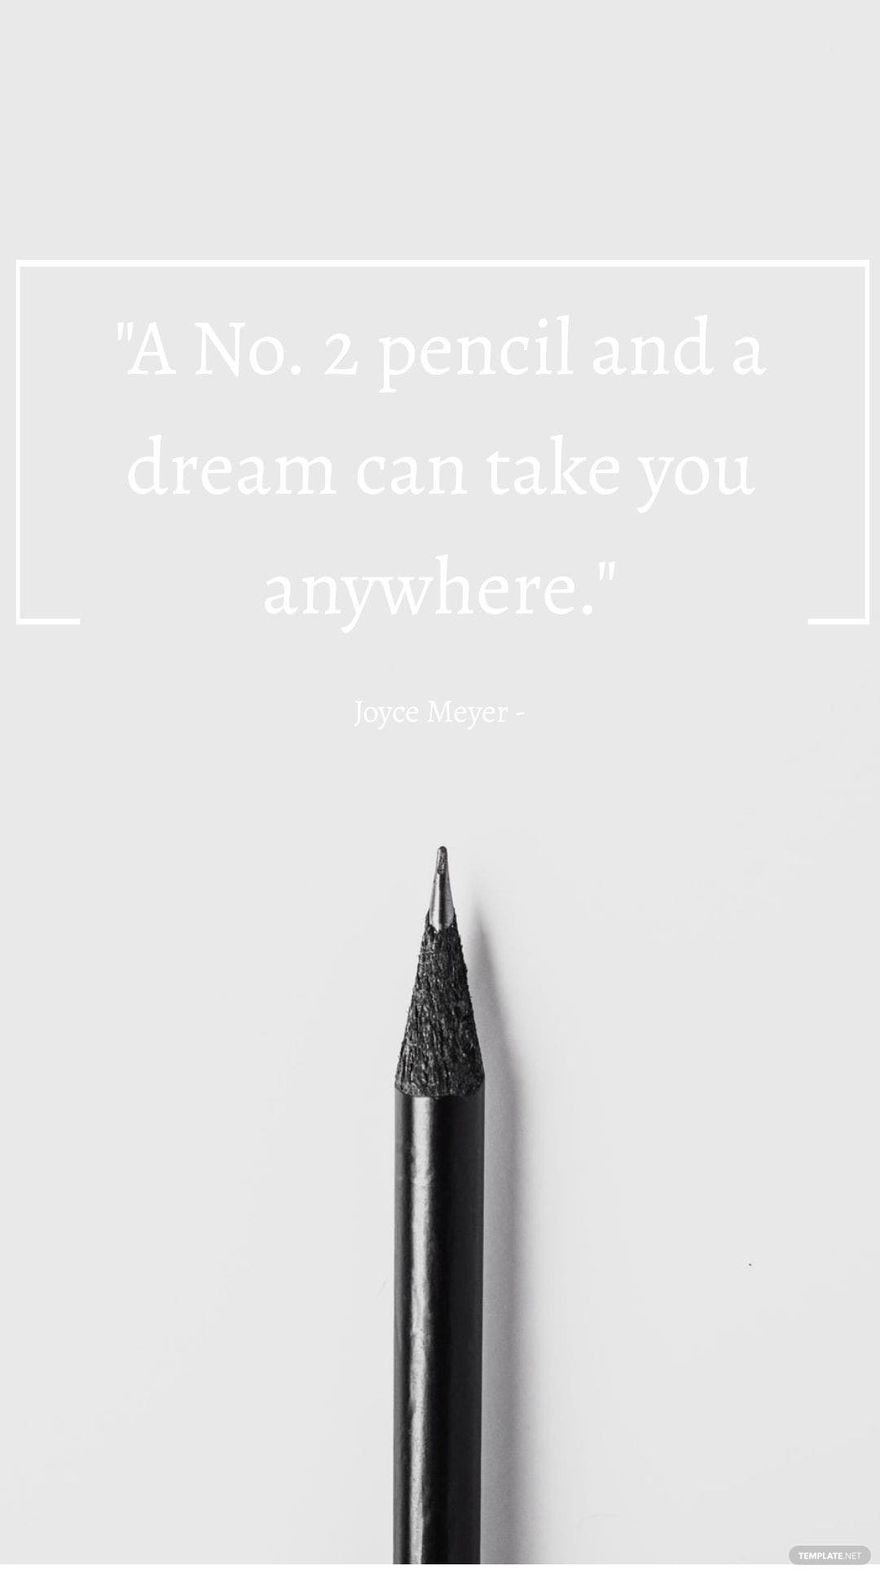 Joyce Meyer - A No. 2 pencil and a dream can take you anywhere.